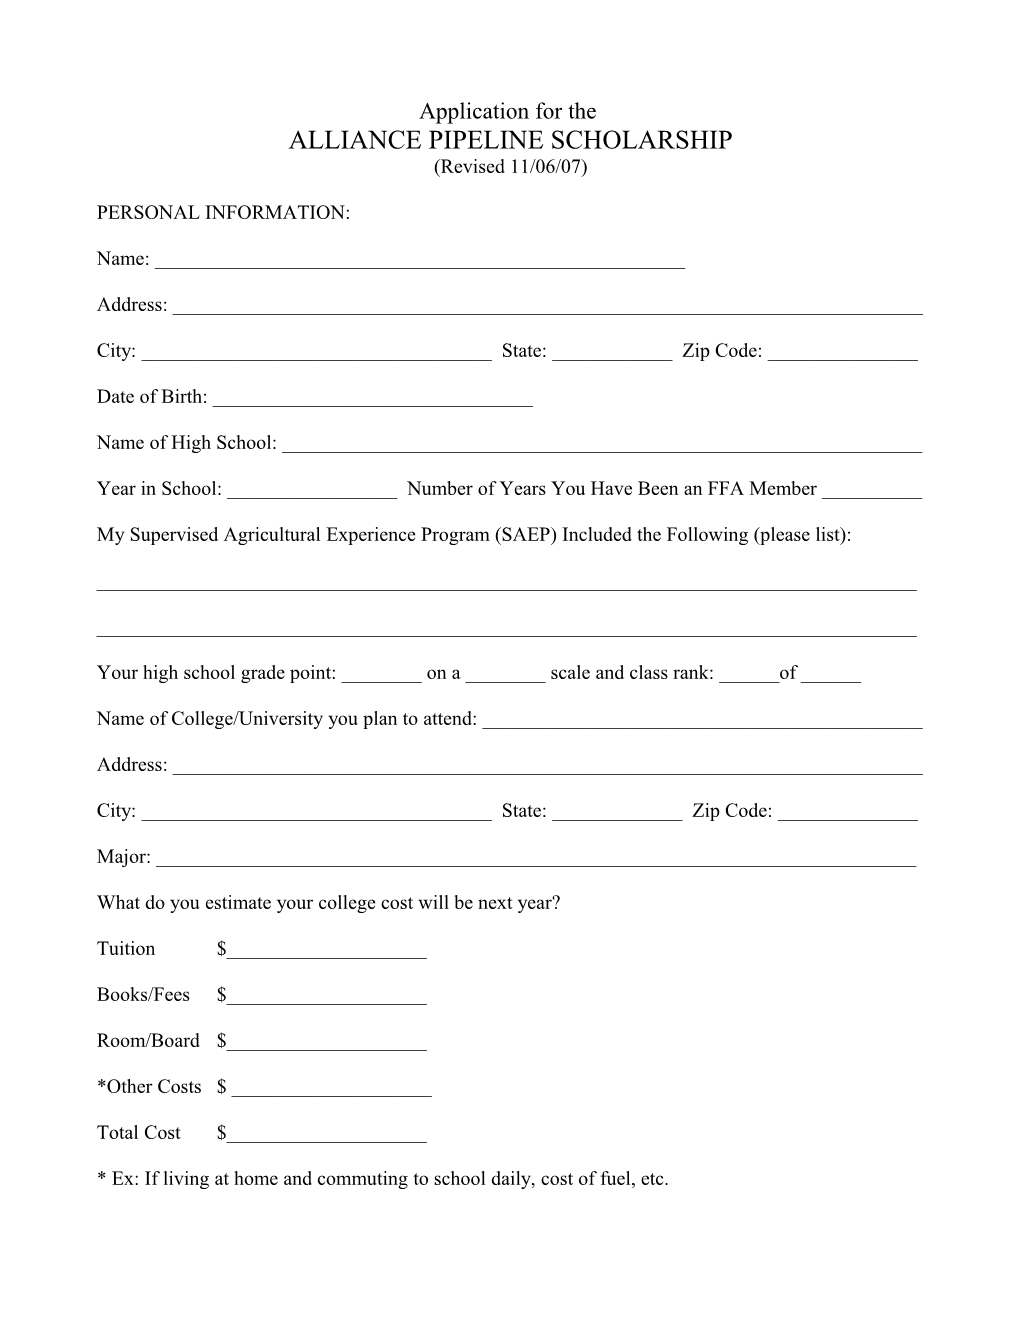 Application for The s3